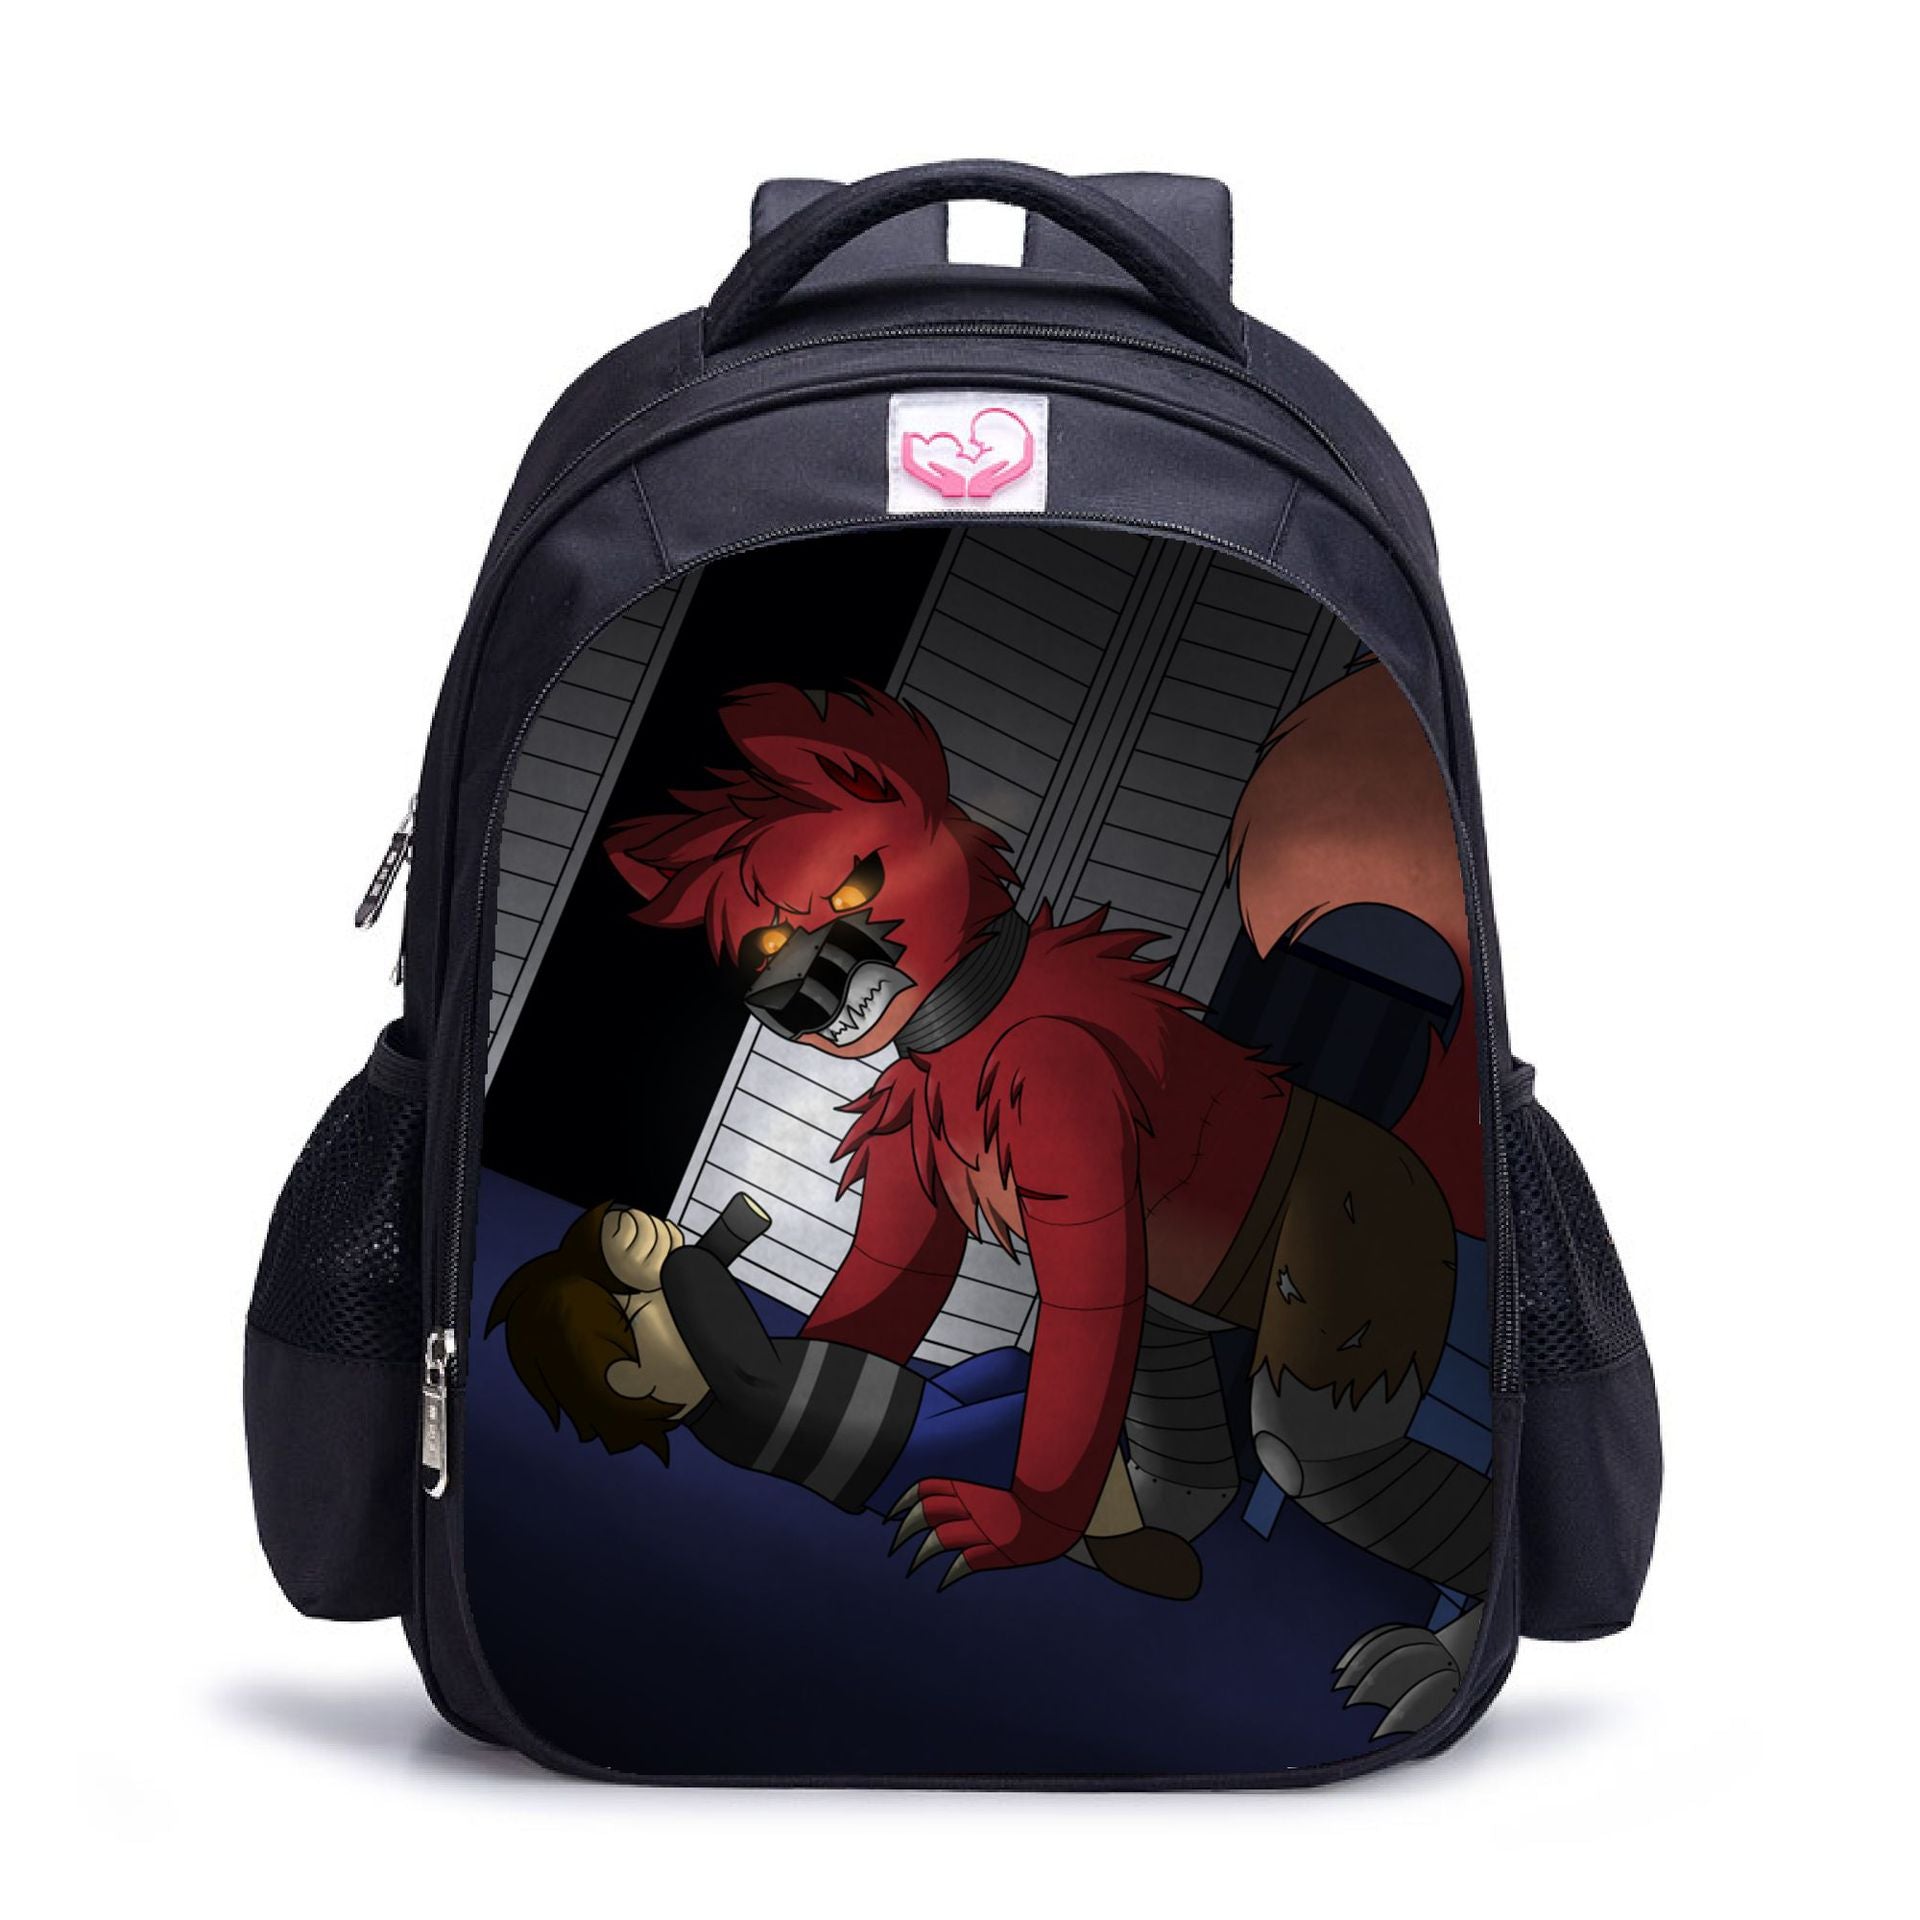 Sundrop Fnaf Backpack Student Schoolbag Three Sizes Bags